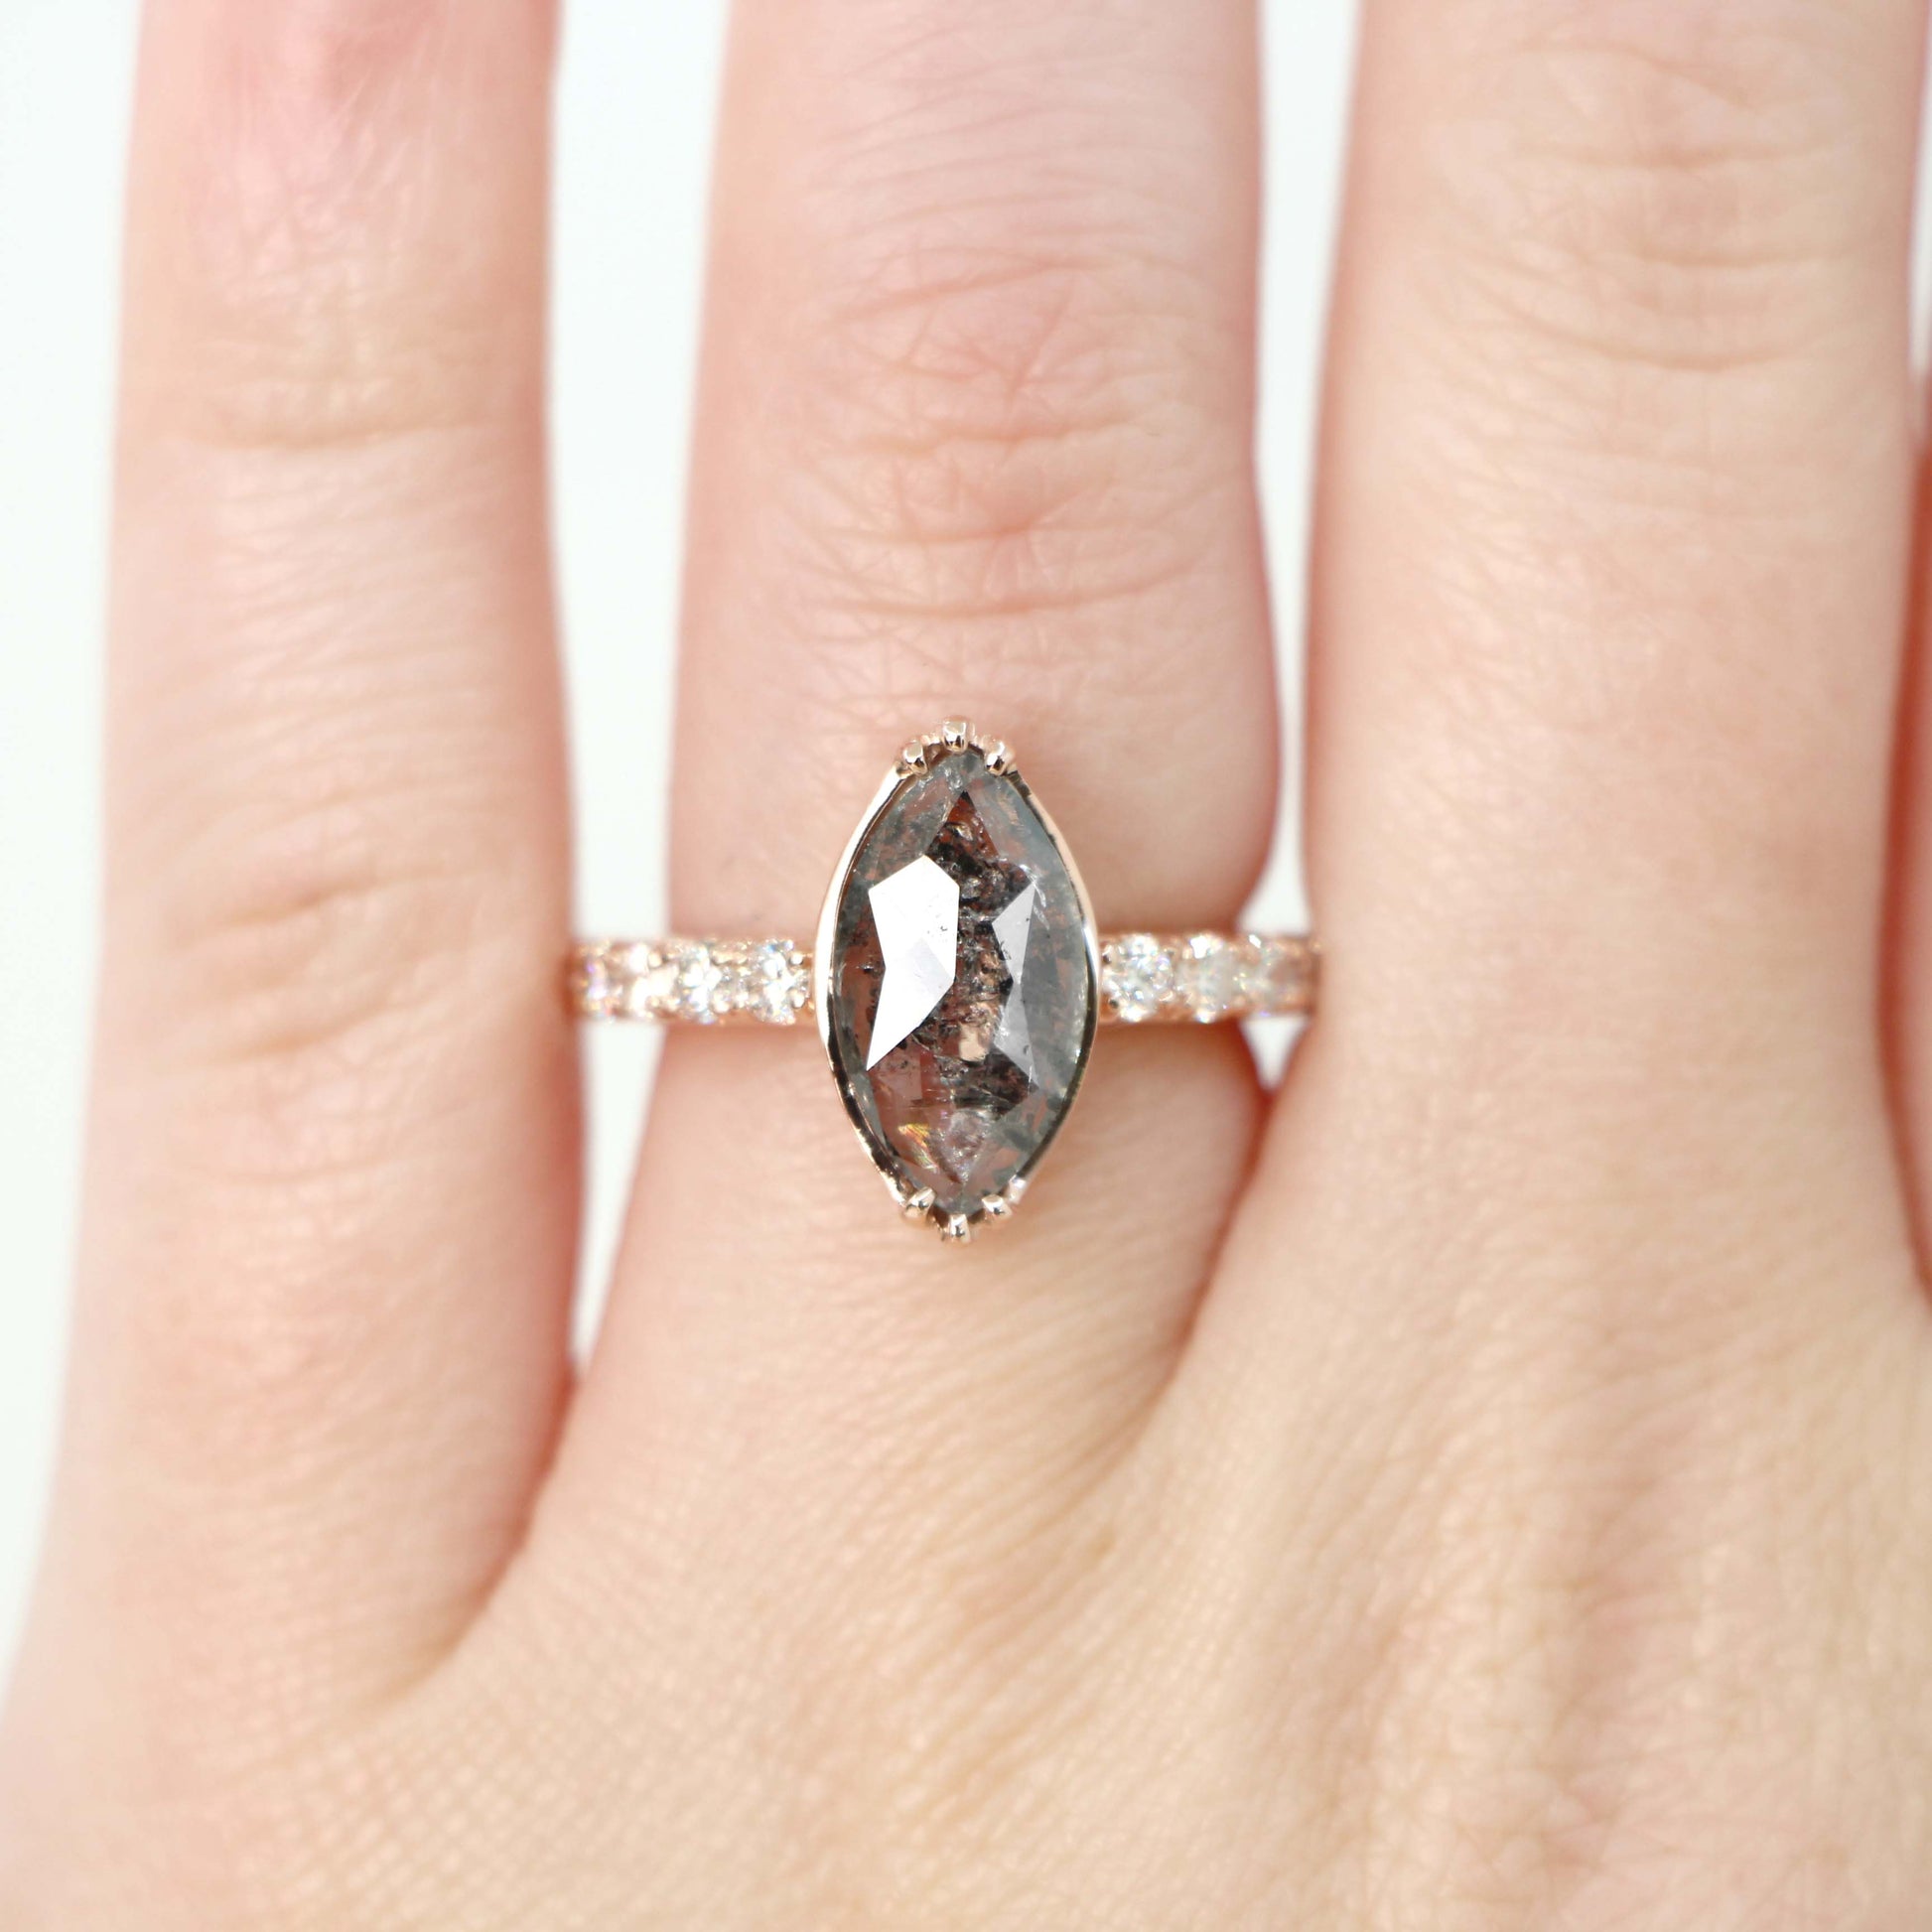 Alice Ring with a 1.92 Carat Dark and Clear Marquise Celestial Diamond and White Accent Diamonds in 14k Rose Gold - Ready to Size and Ship - Midwinter Co. Alternative Bridal Rings and Modern Fine Jewelry